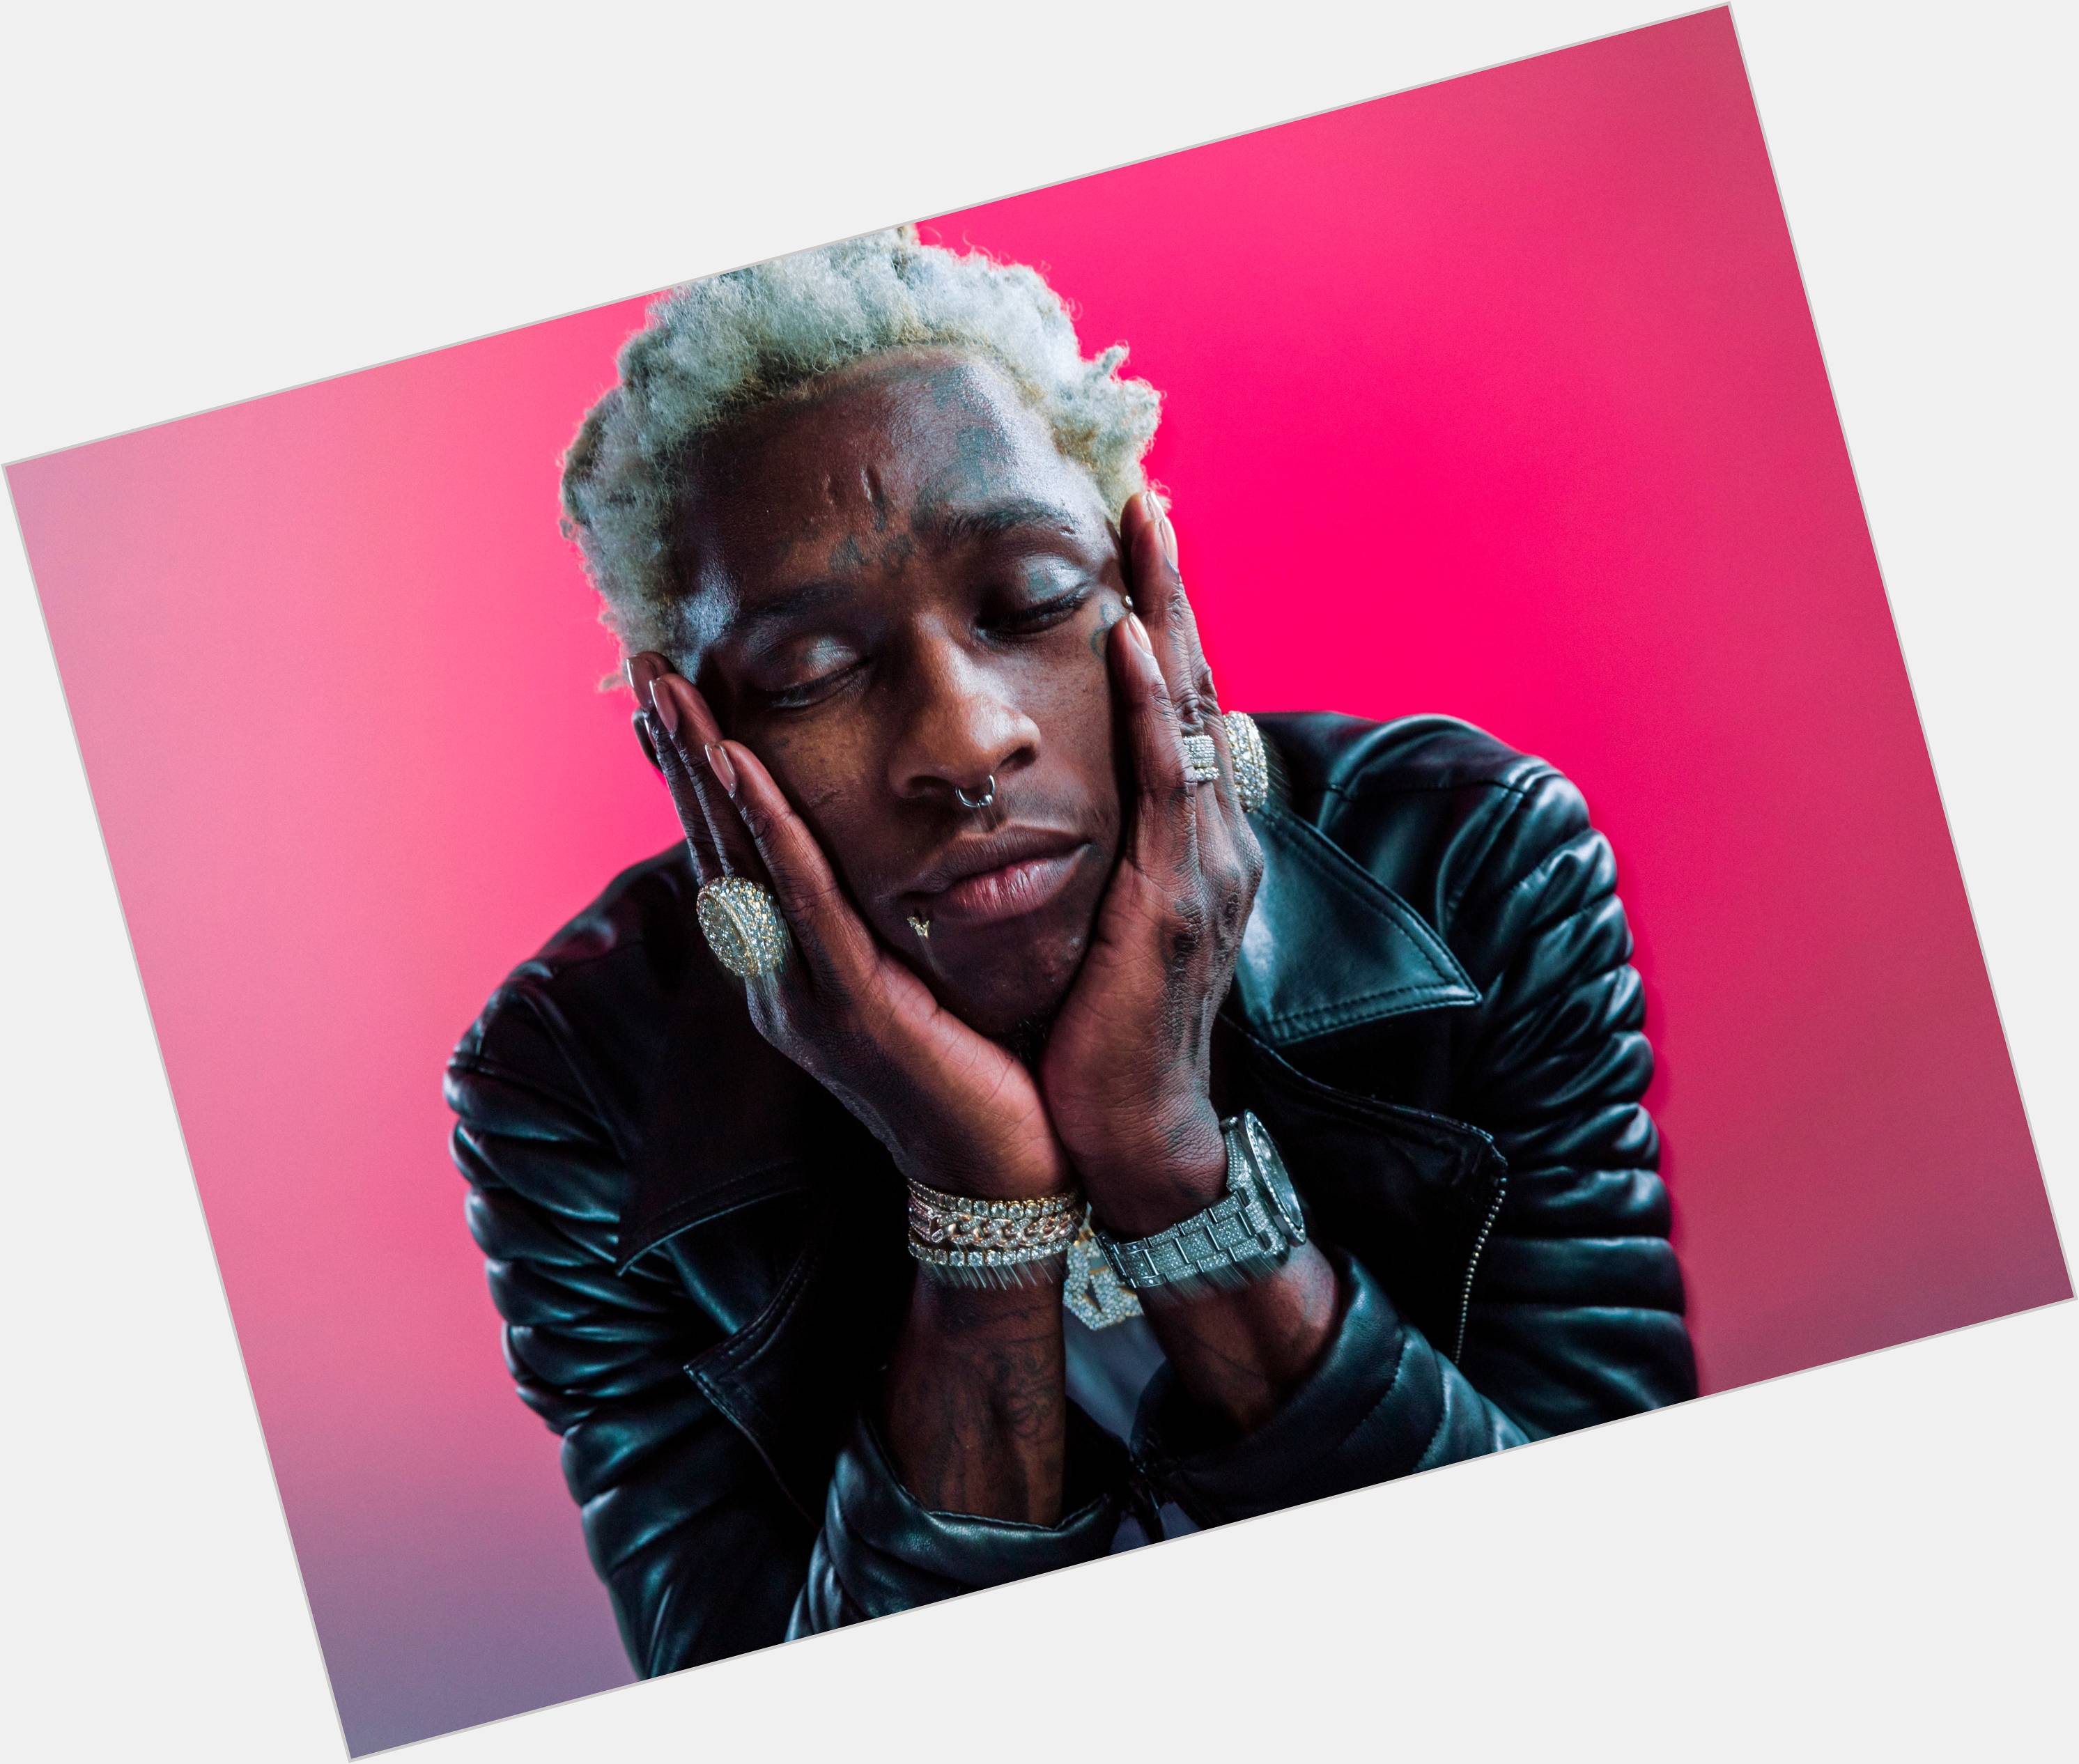 Https://fanpagepress.net/m/Y/Young Thug Sexy 1